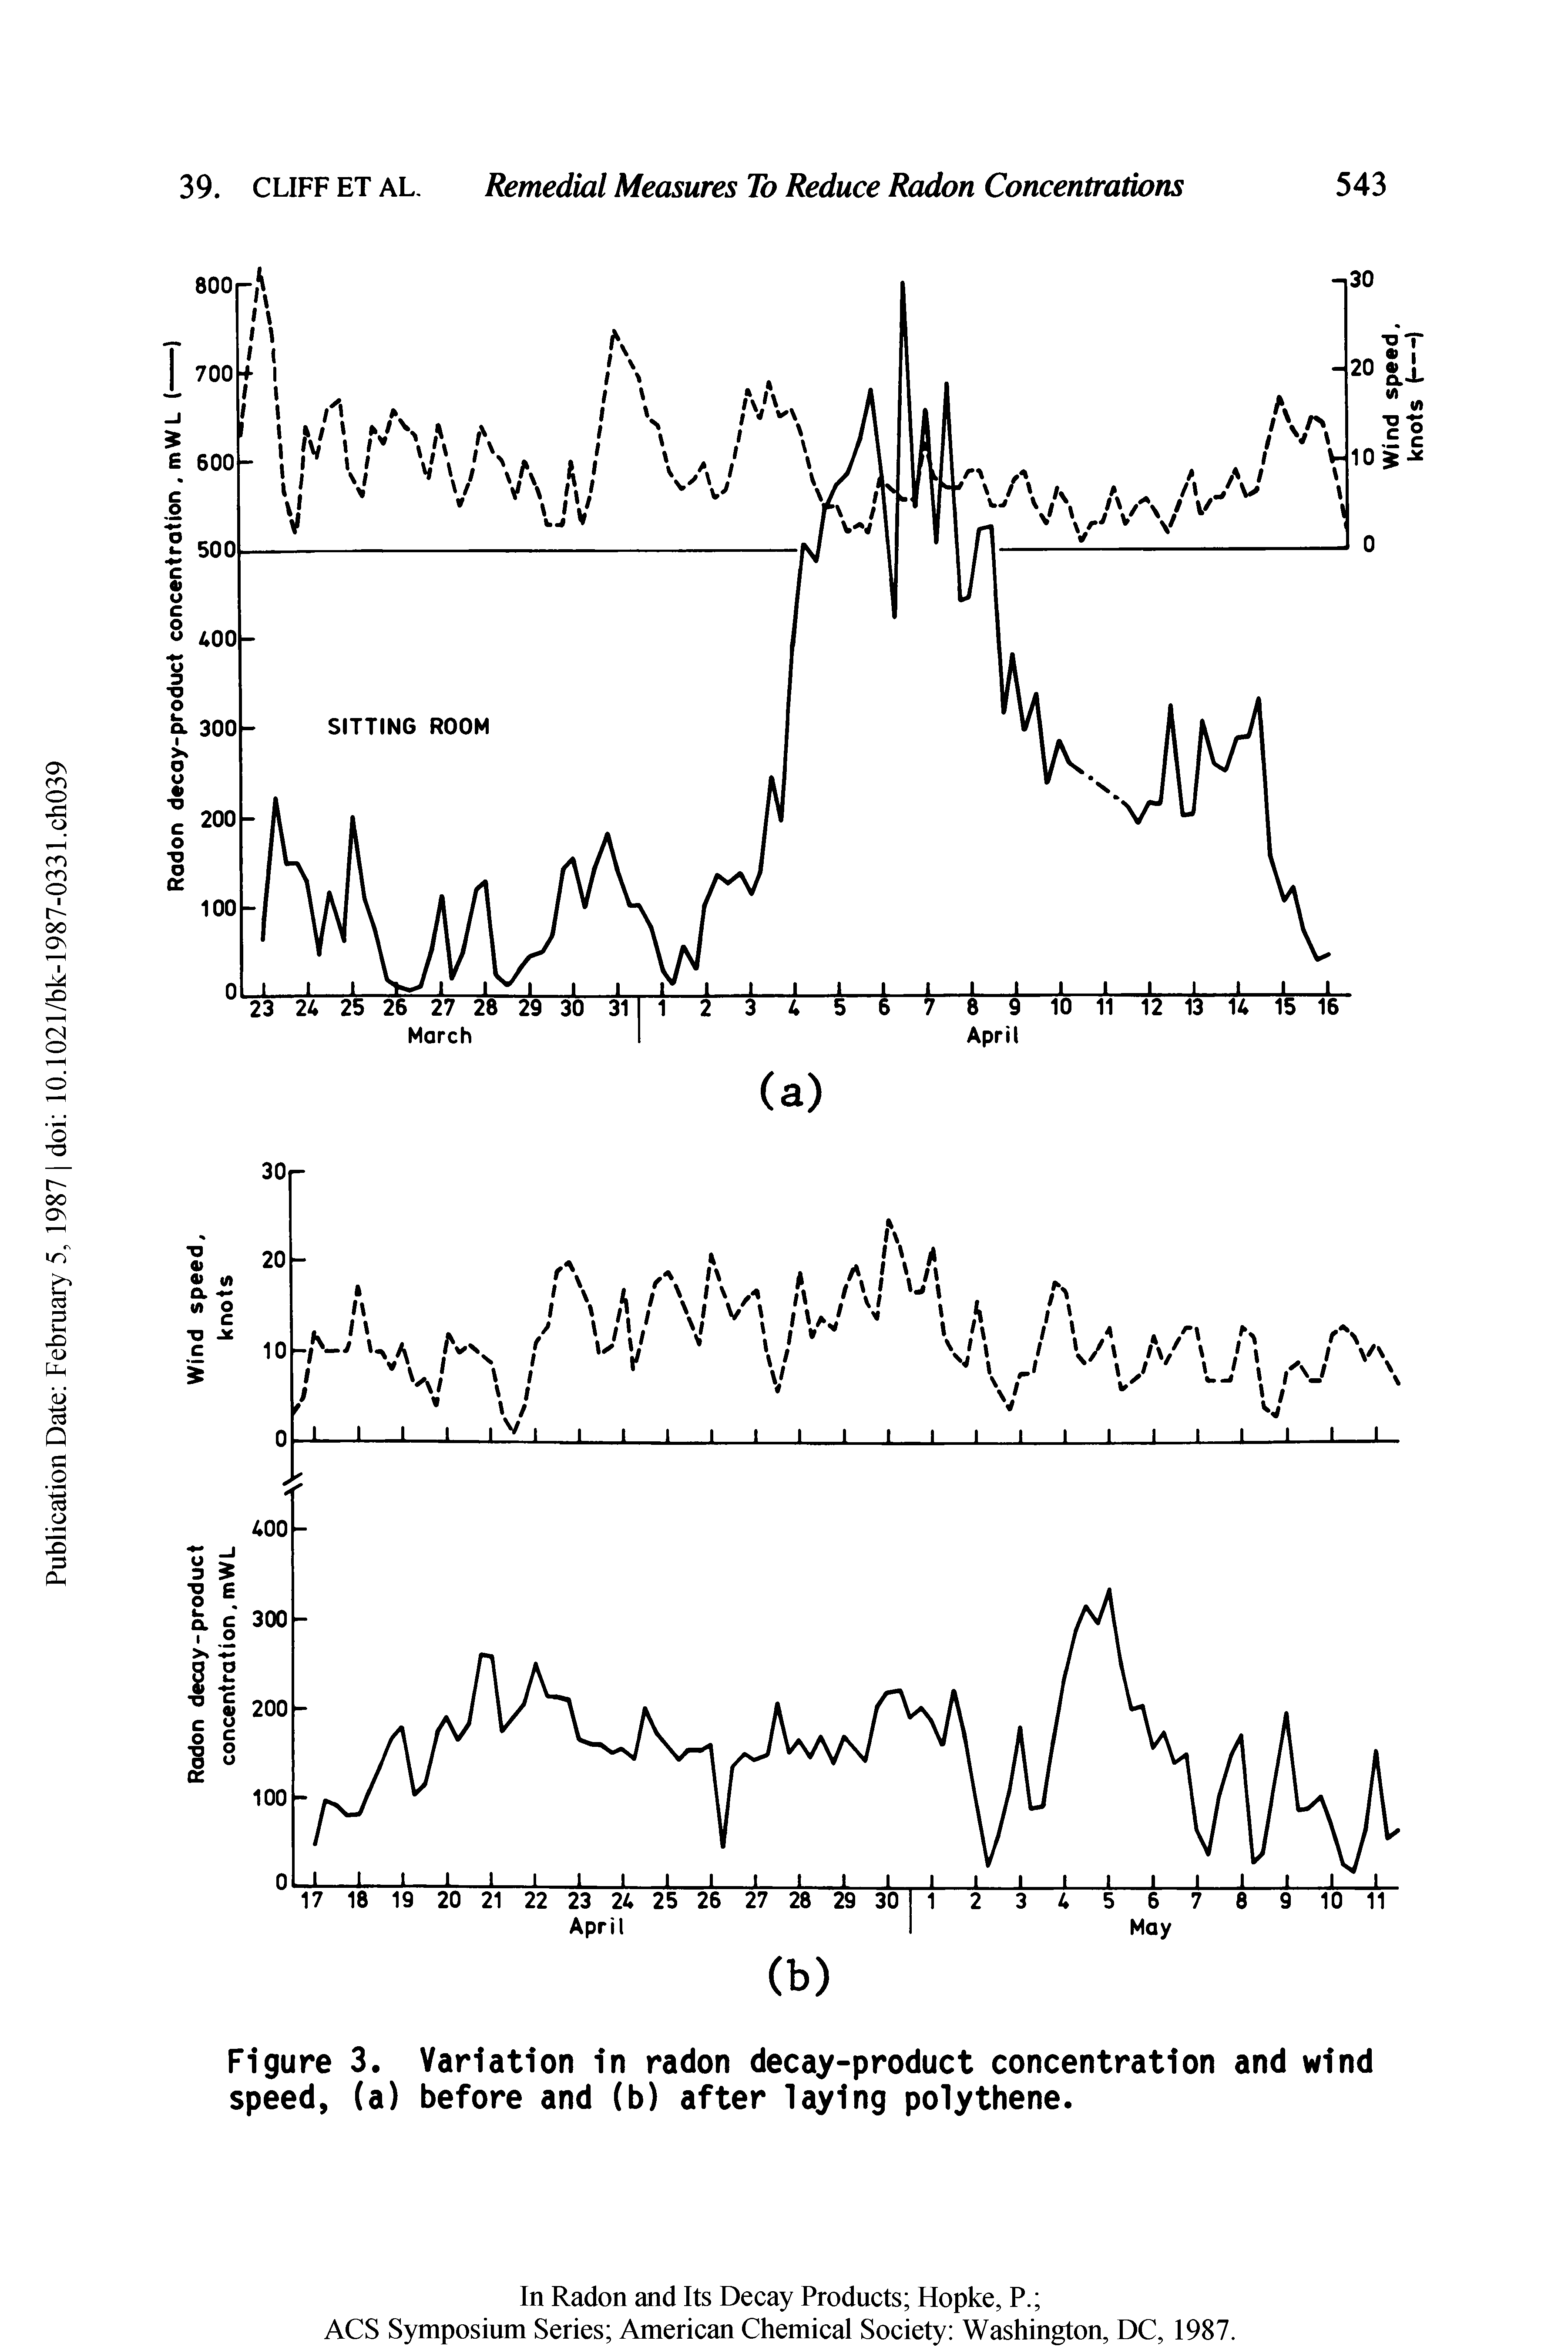 Figure 3. Variation in radon decay-product concentration and wind speed, (a) before and (b) after laying polythene.